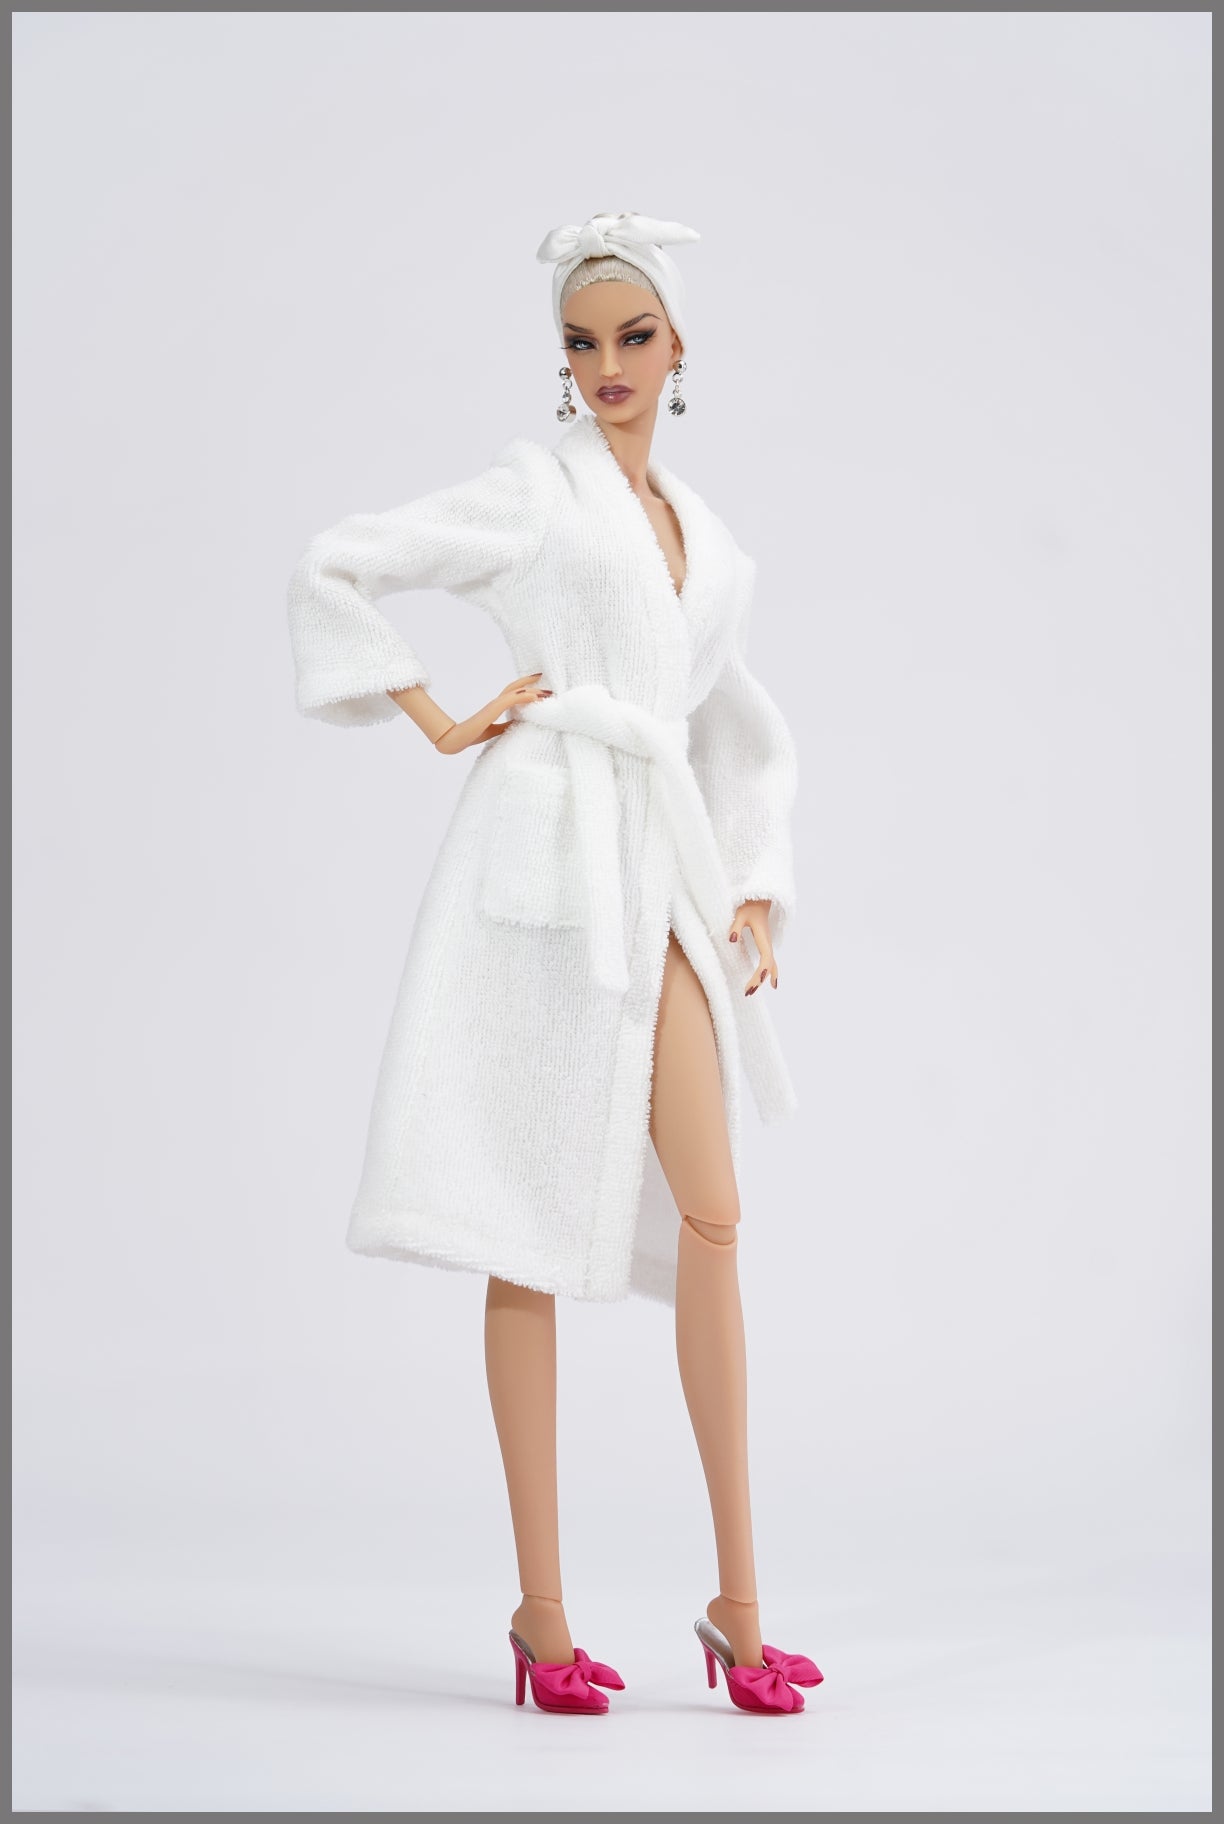 Muses La Vacanza Ginnie Dressed Doll, Pre-Oder for Winter 2023 Delivery.